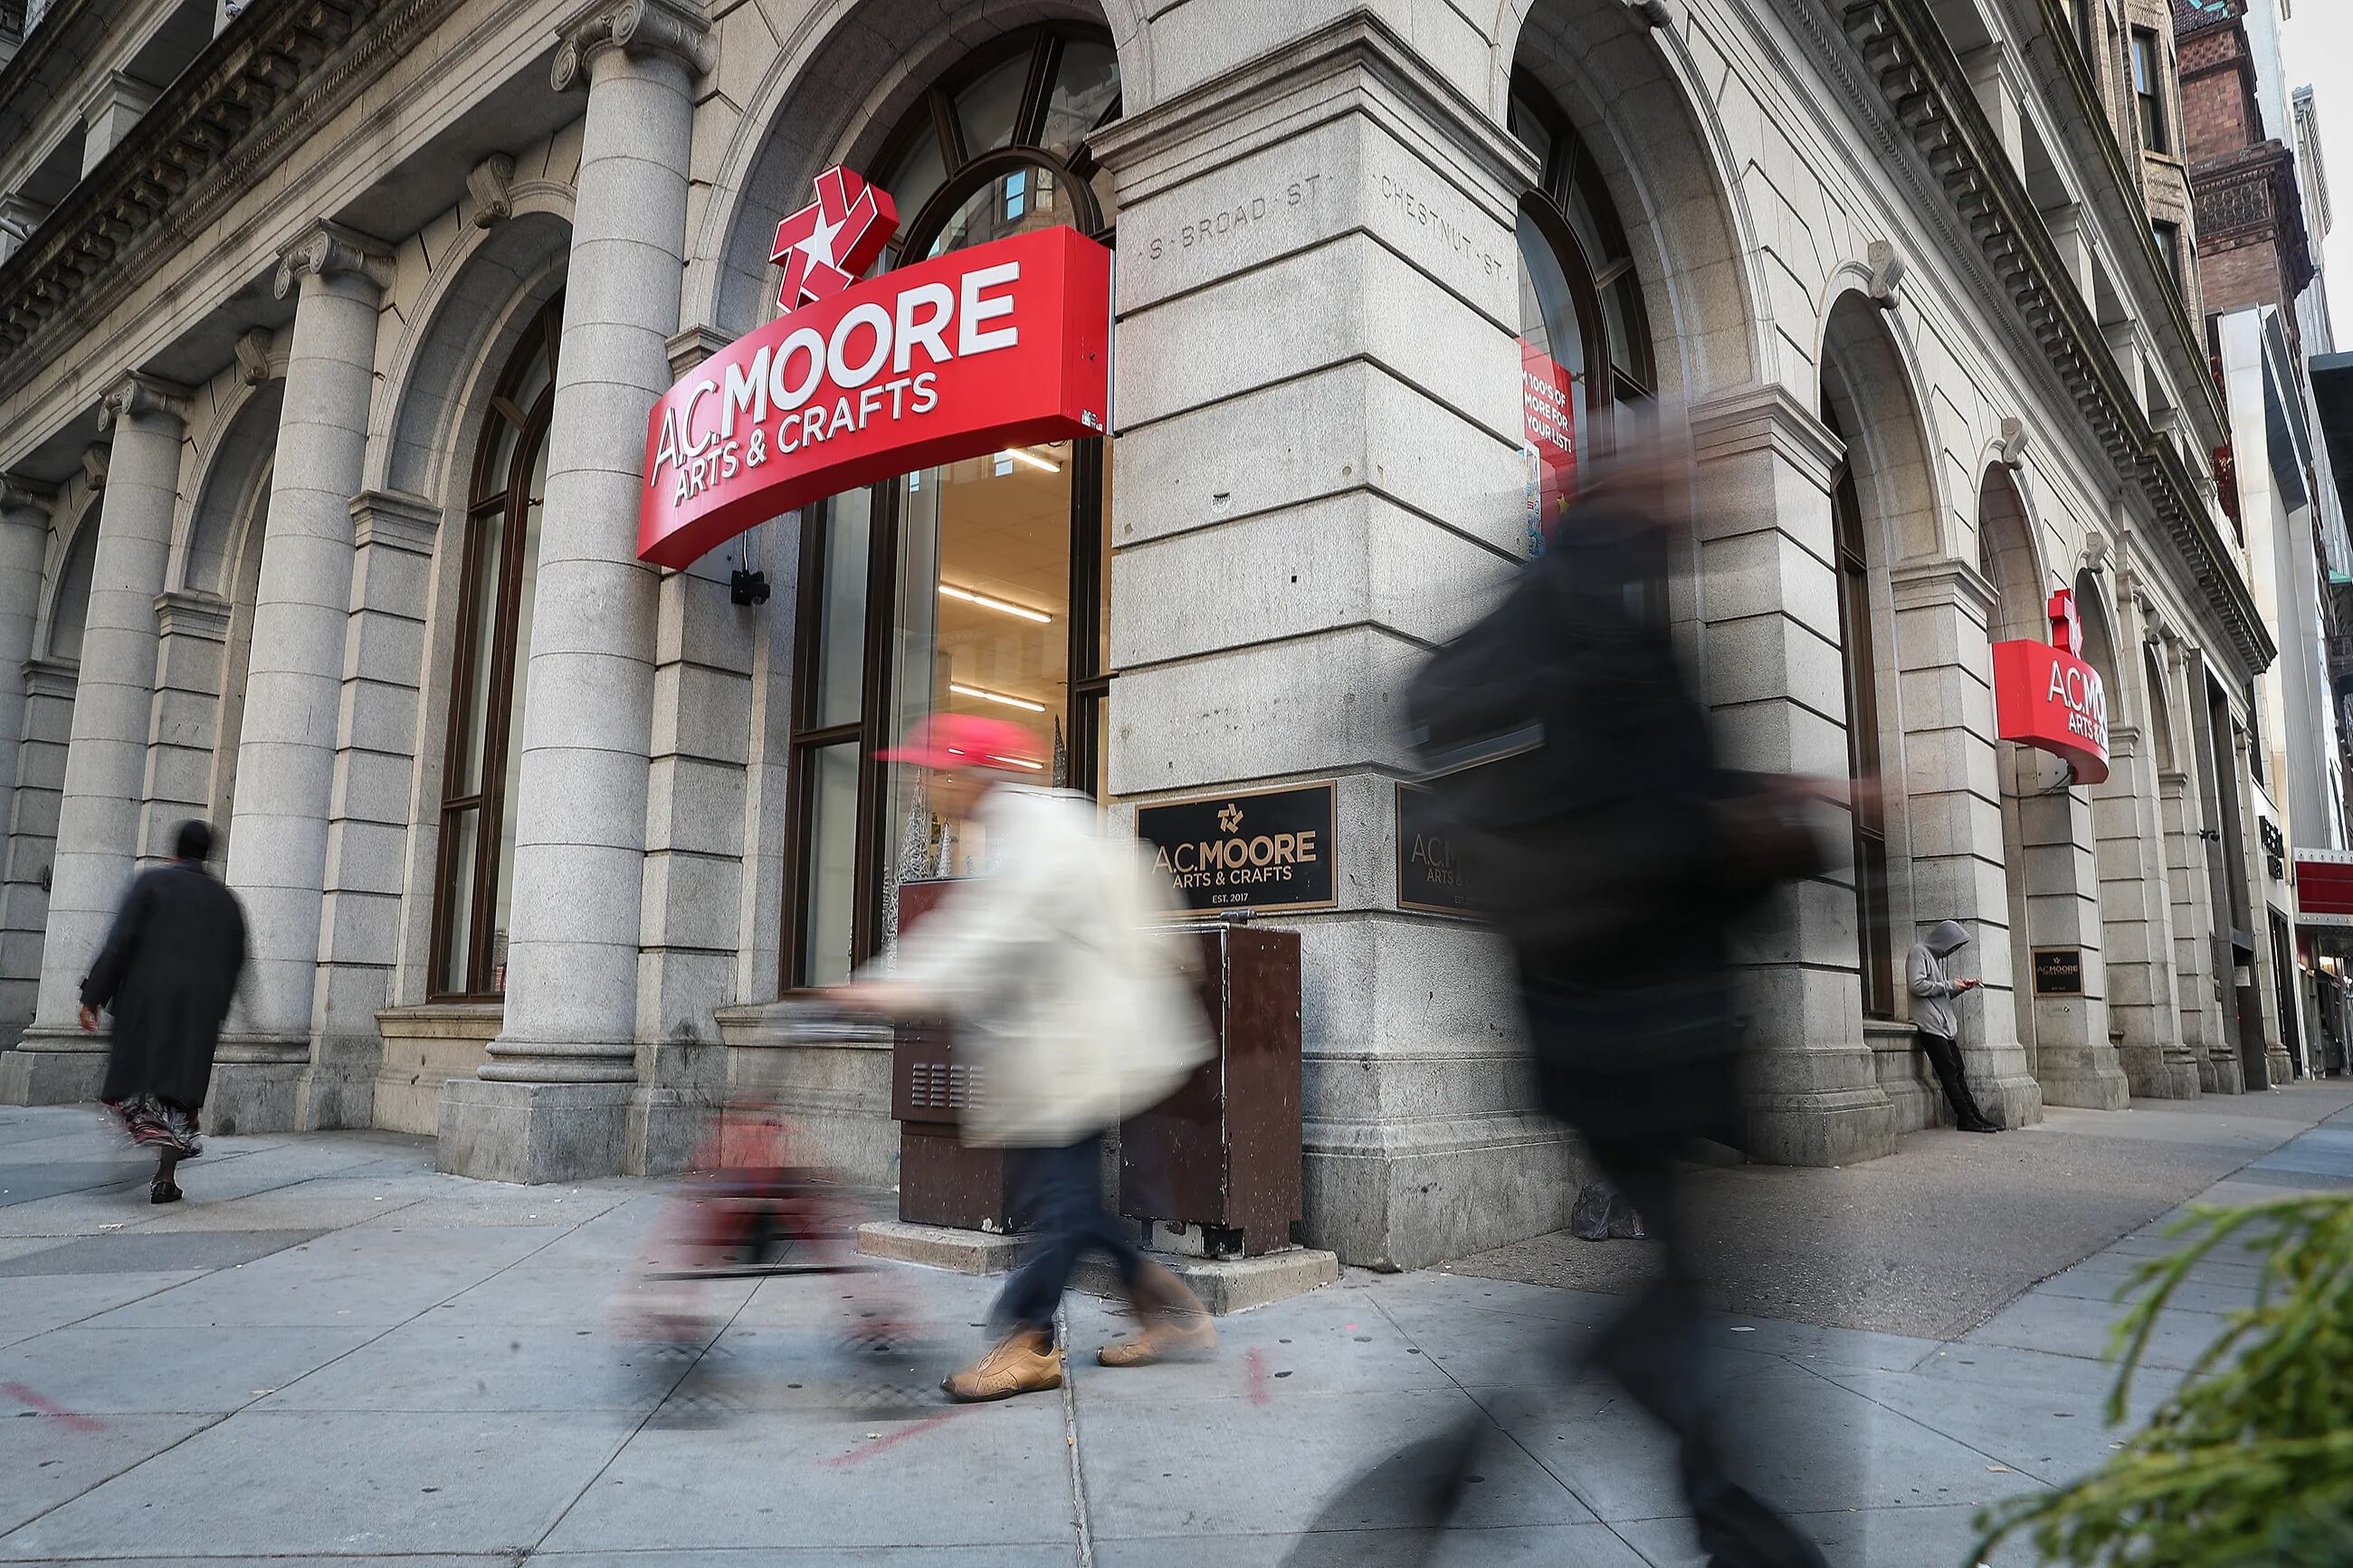 A.C. Moore, based in South Jersey, closing all of its 145 stores